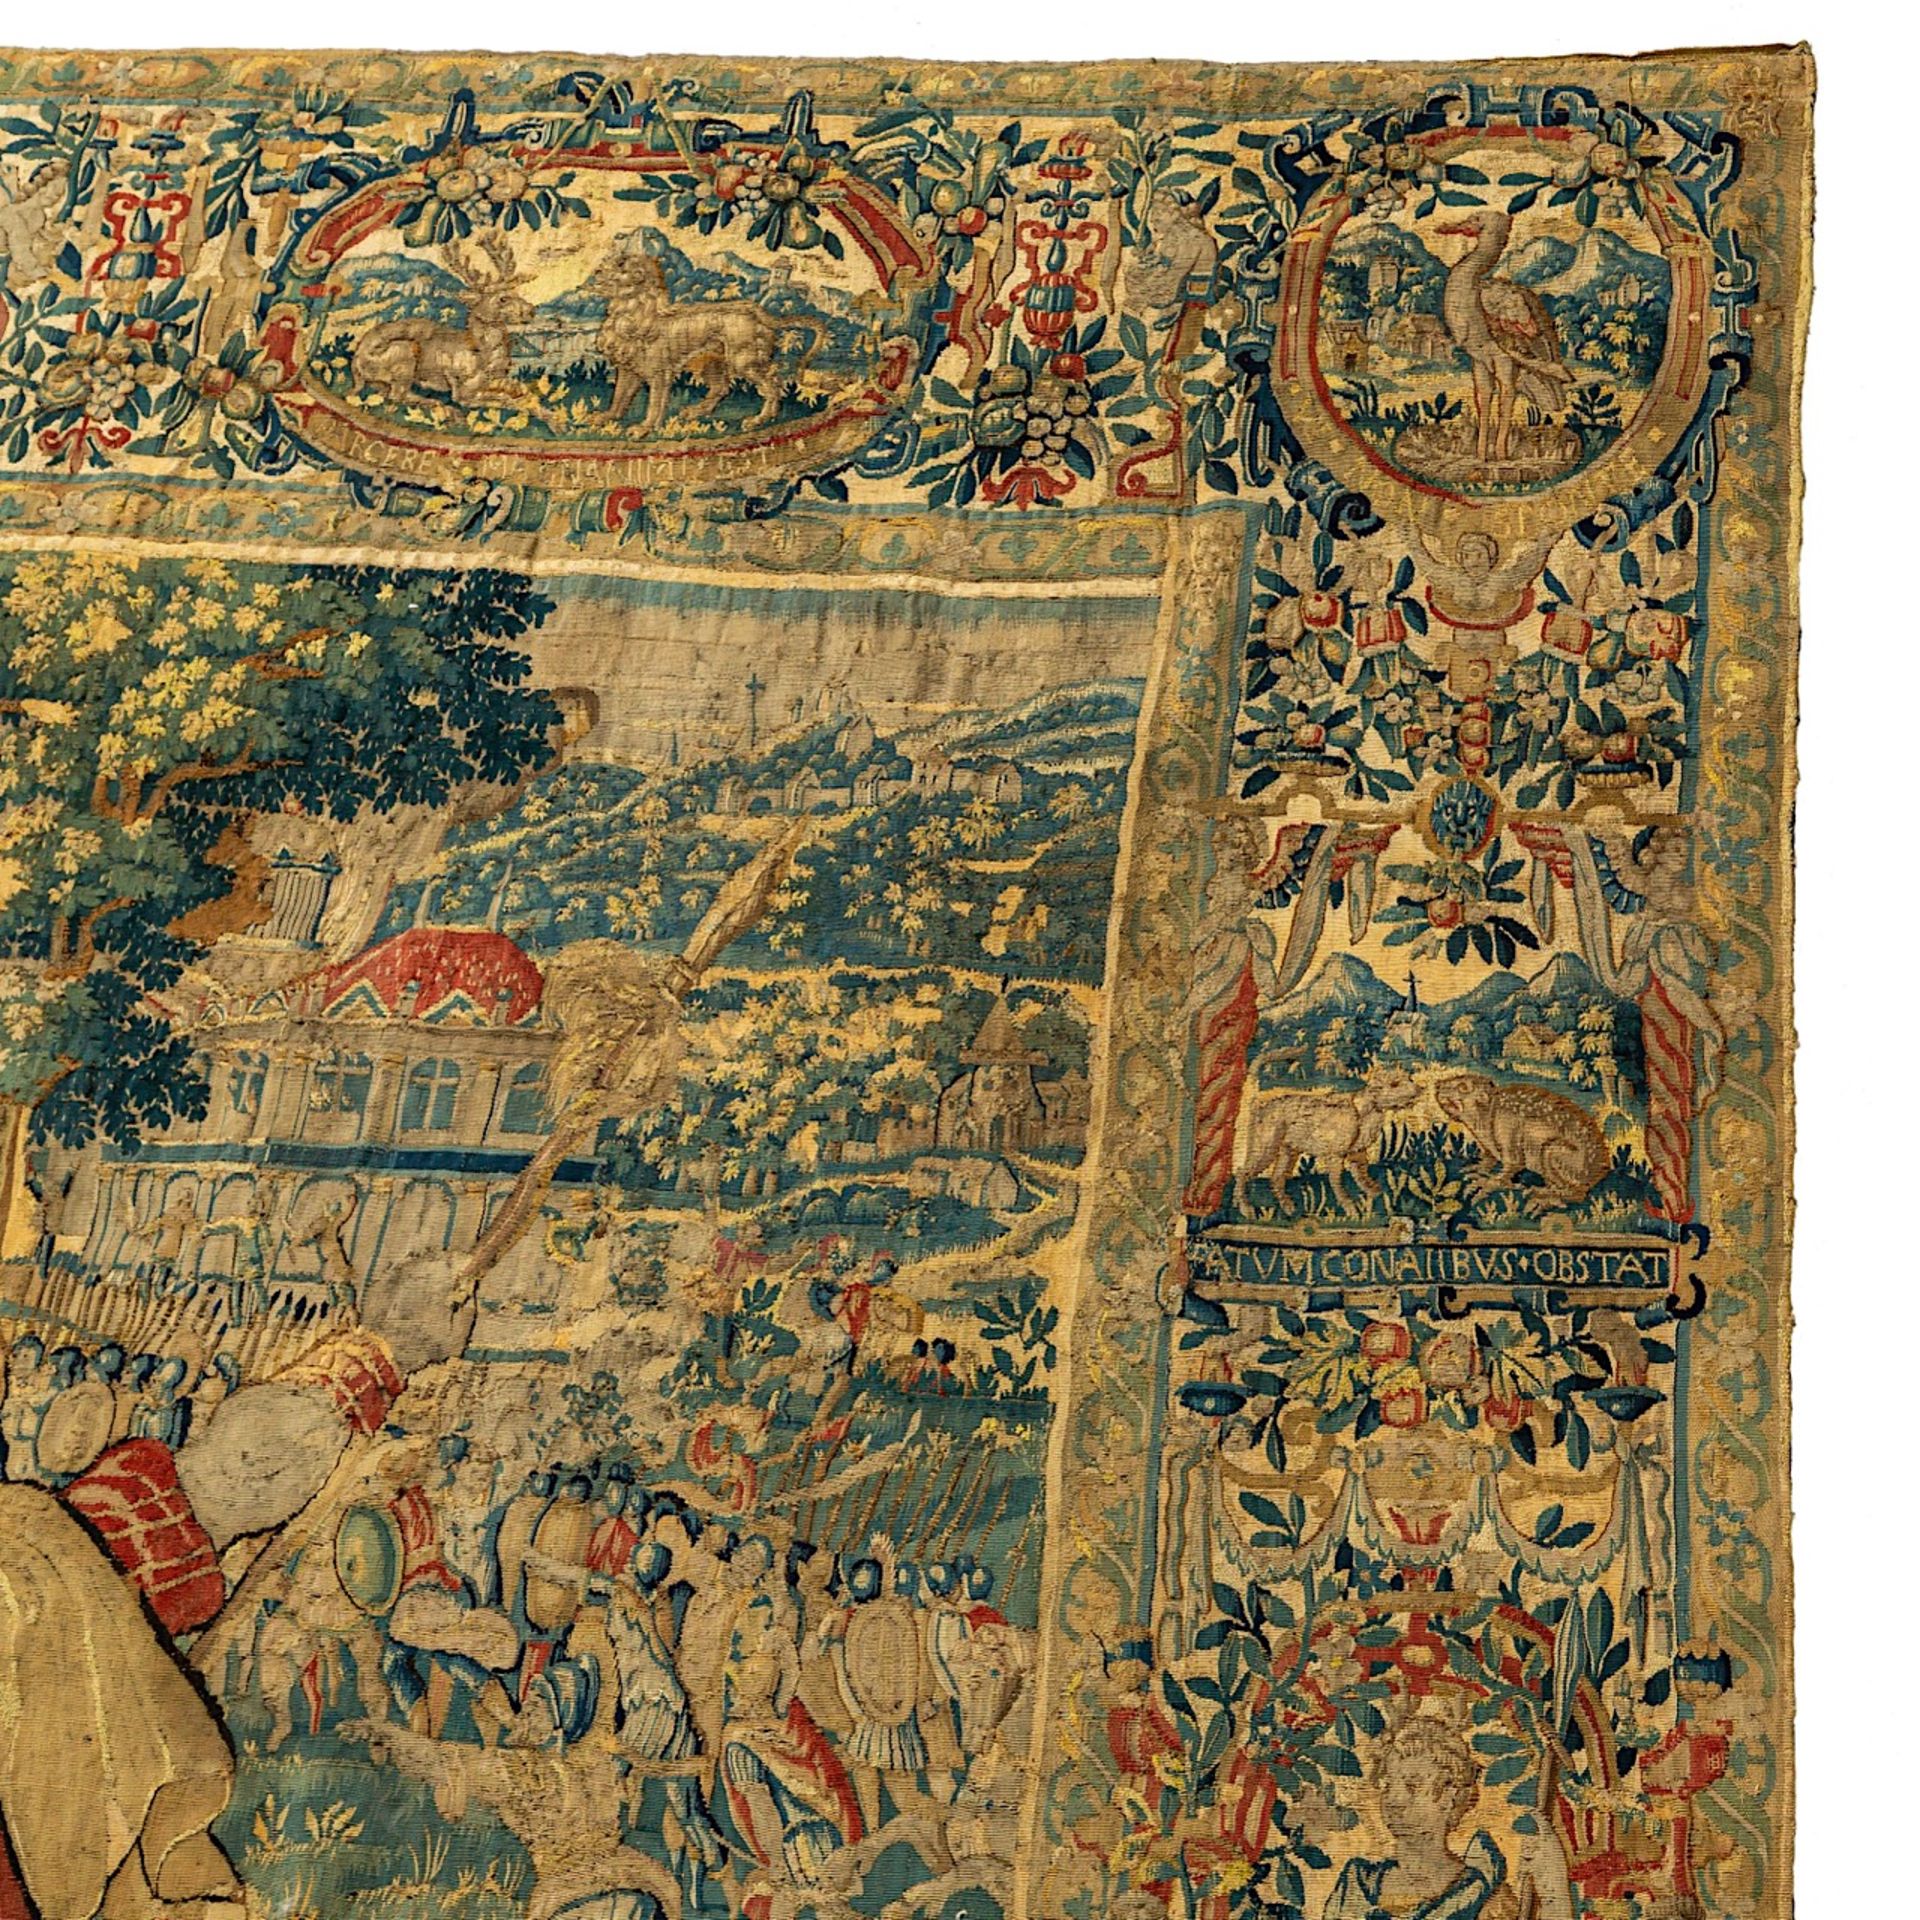 A 16thC Brussels wall tapestry depicting a battle scene, ca 1575-1585, 186 x 306 cm - Image 7 of 11